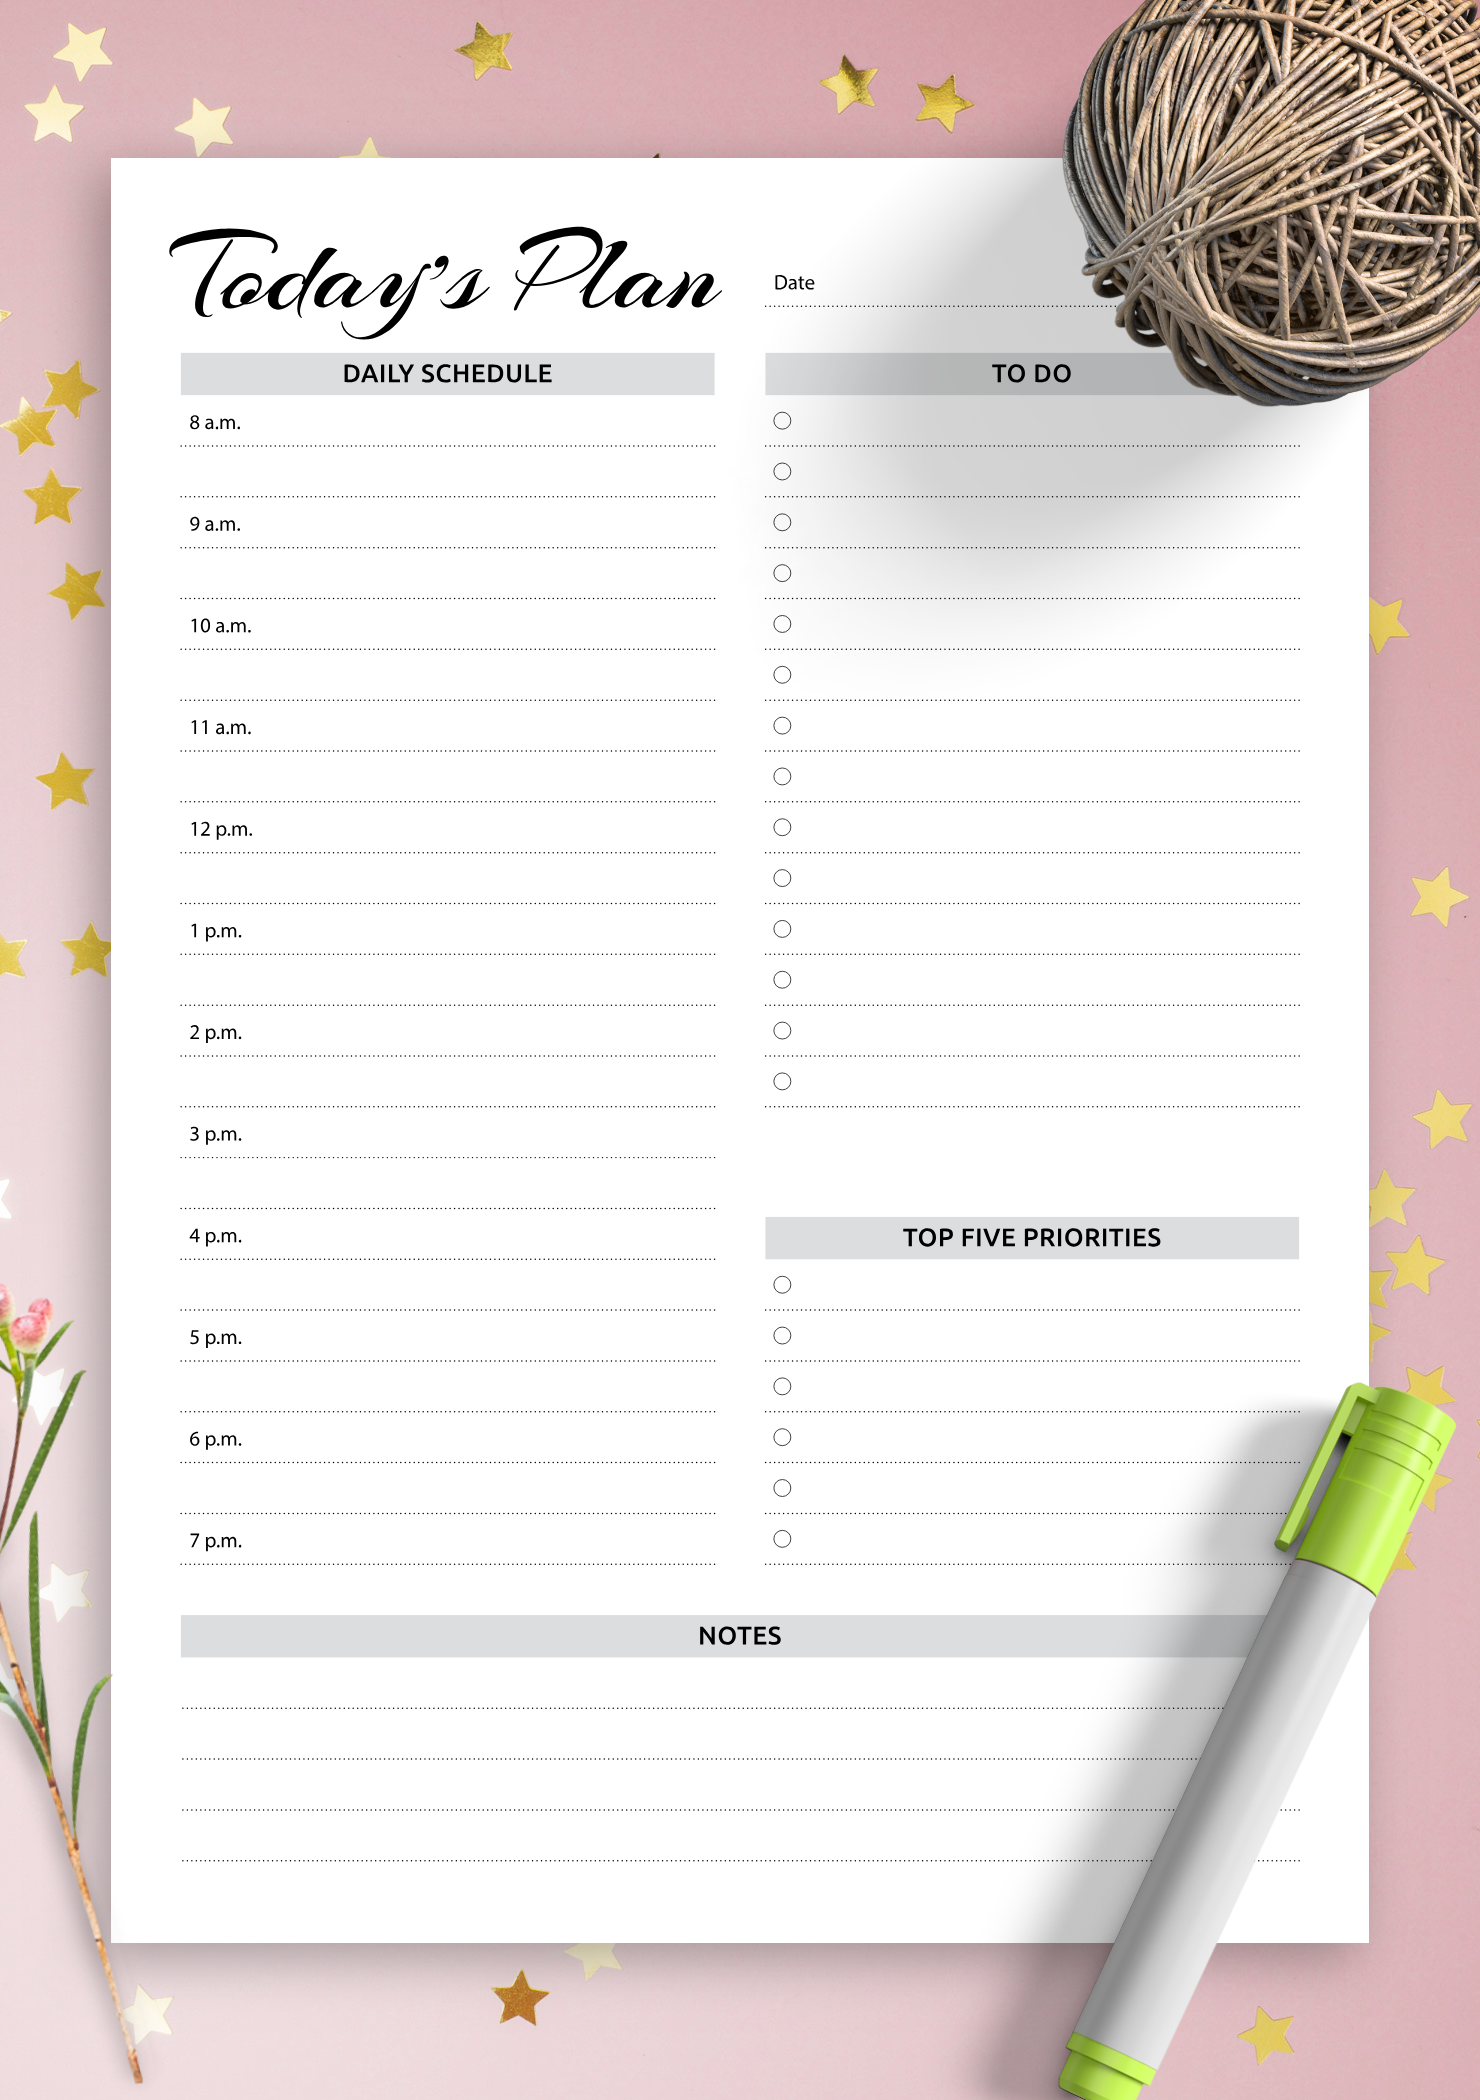 Download Printable Daily planner with hourly schedule & to-do list  Regarding Daily Routine Checklist Template Within Daily Routine Checklist Template